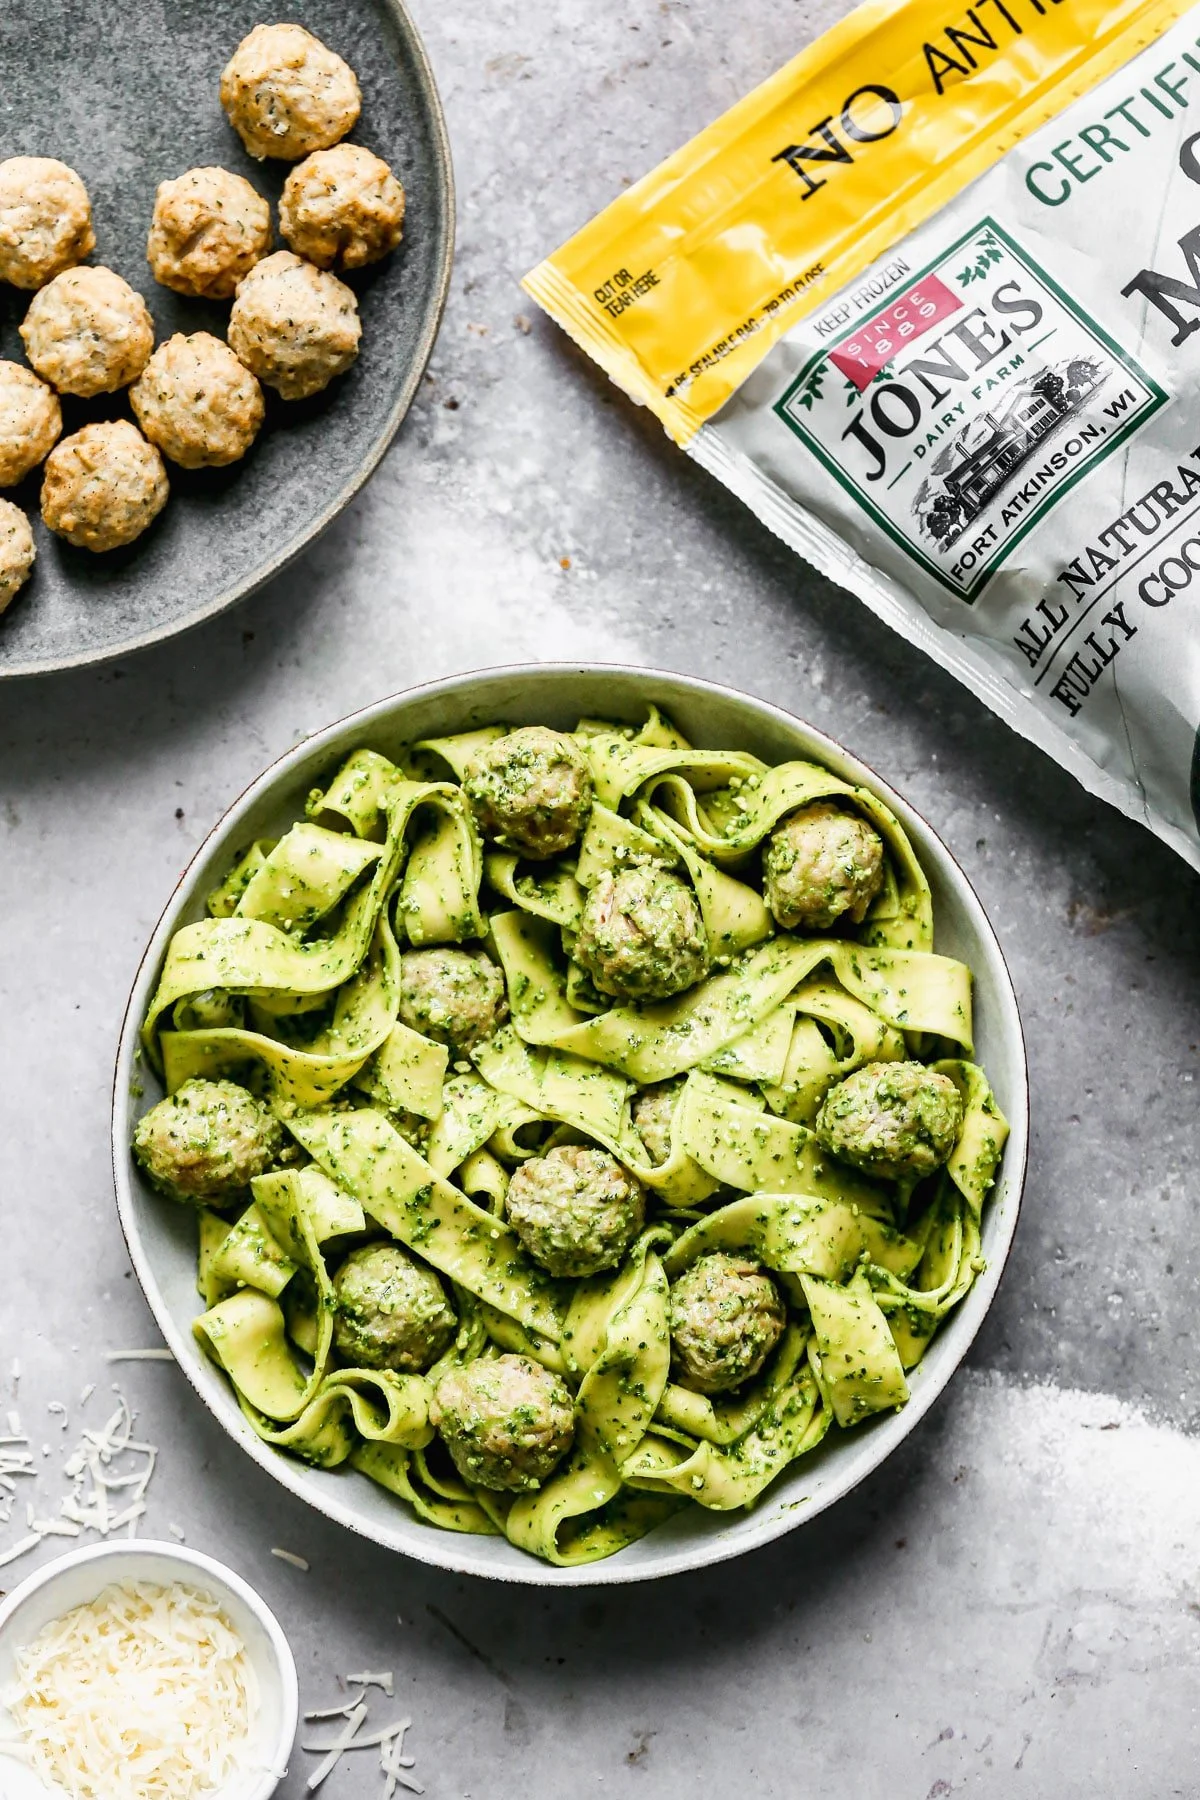 Twirly noodles tossed in a five-minute kale pesto, tender chicken meatballs, and plenty of nutty parmesan are the makings of our new favorite throw-it-together weeknight meal – Kale Pesto Pasta. Just because it's winter, doesn't mean we have to leave homemade pesto behind. Swapping out hearty wintery kale for a portion of the pesto brings a little seasonal aspect to our pesto and using crunchy almonds instead of pine nuts make this easy meal pocket-friendly as well. 